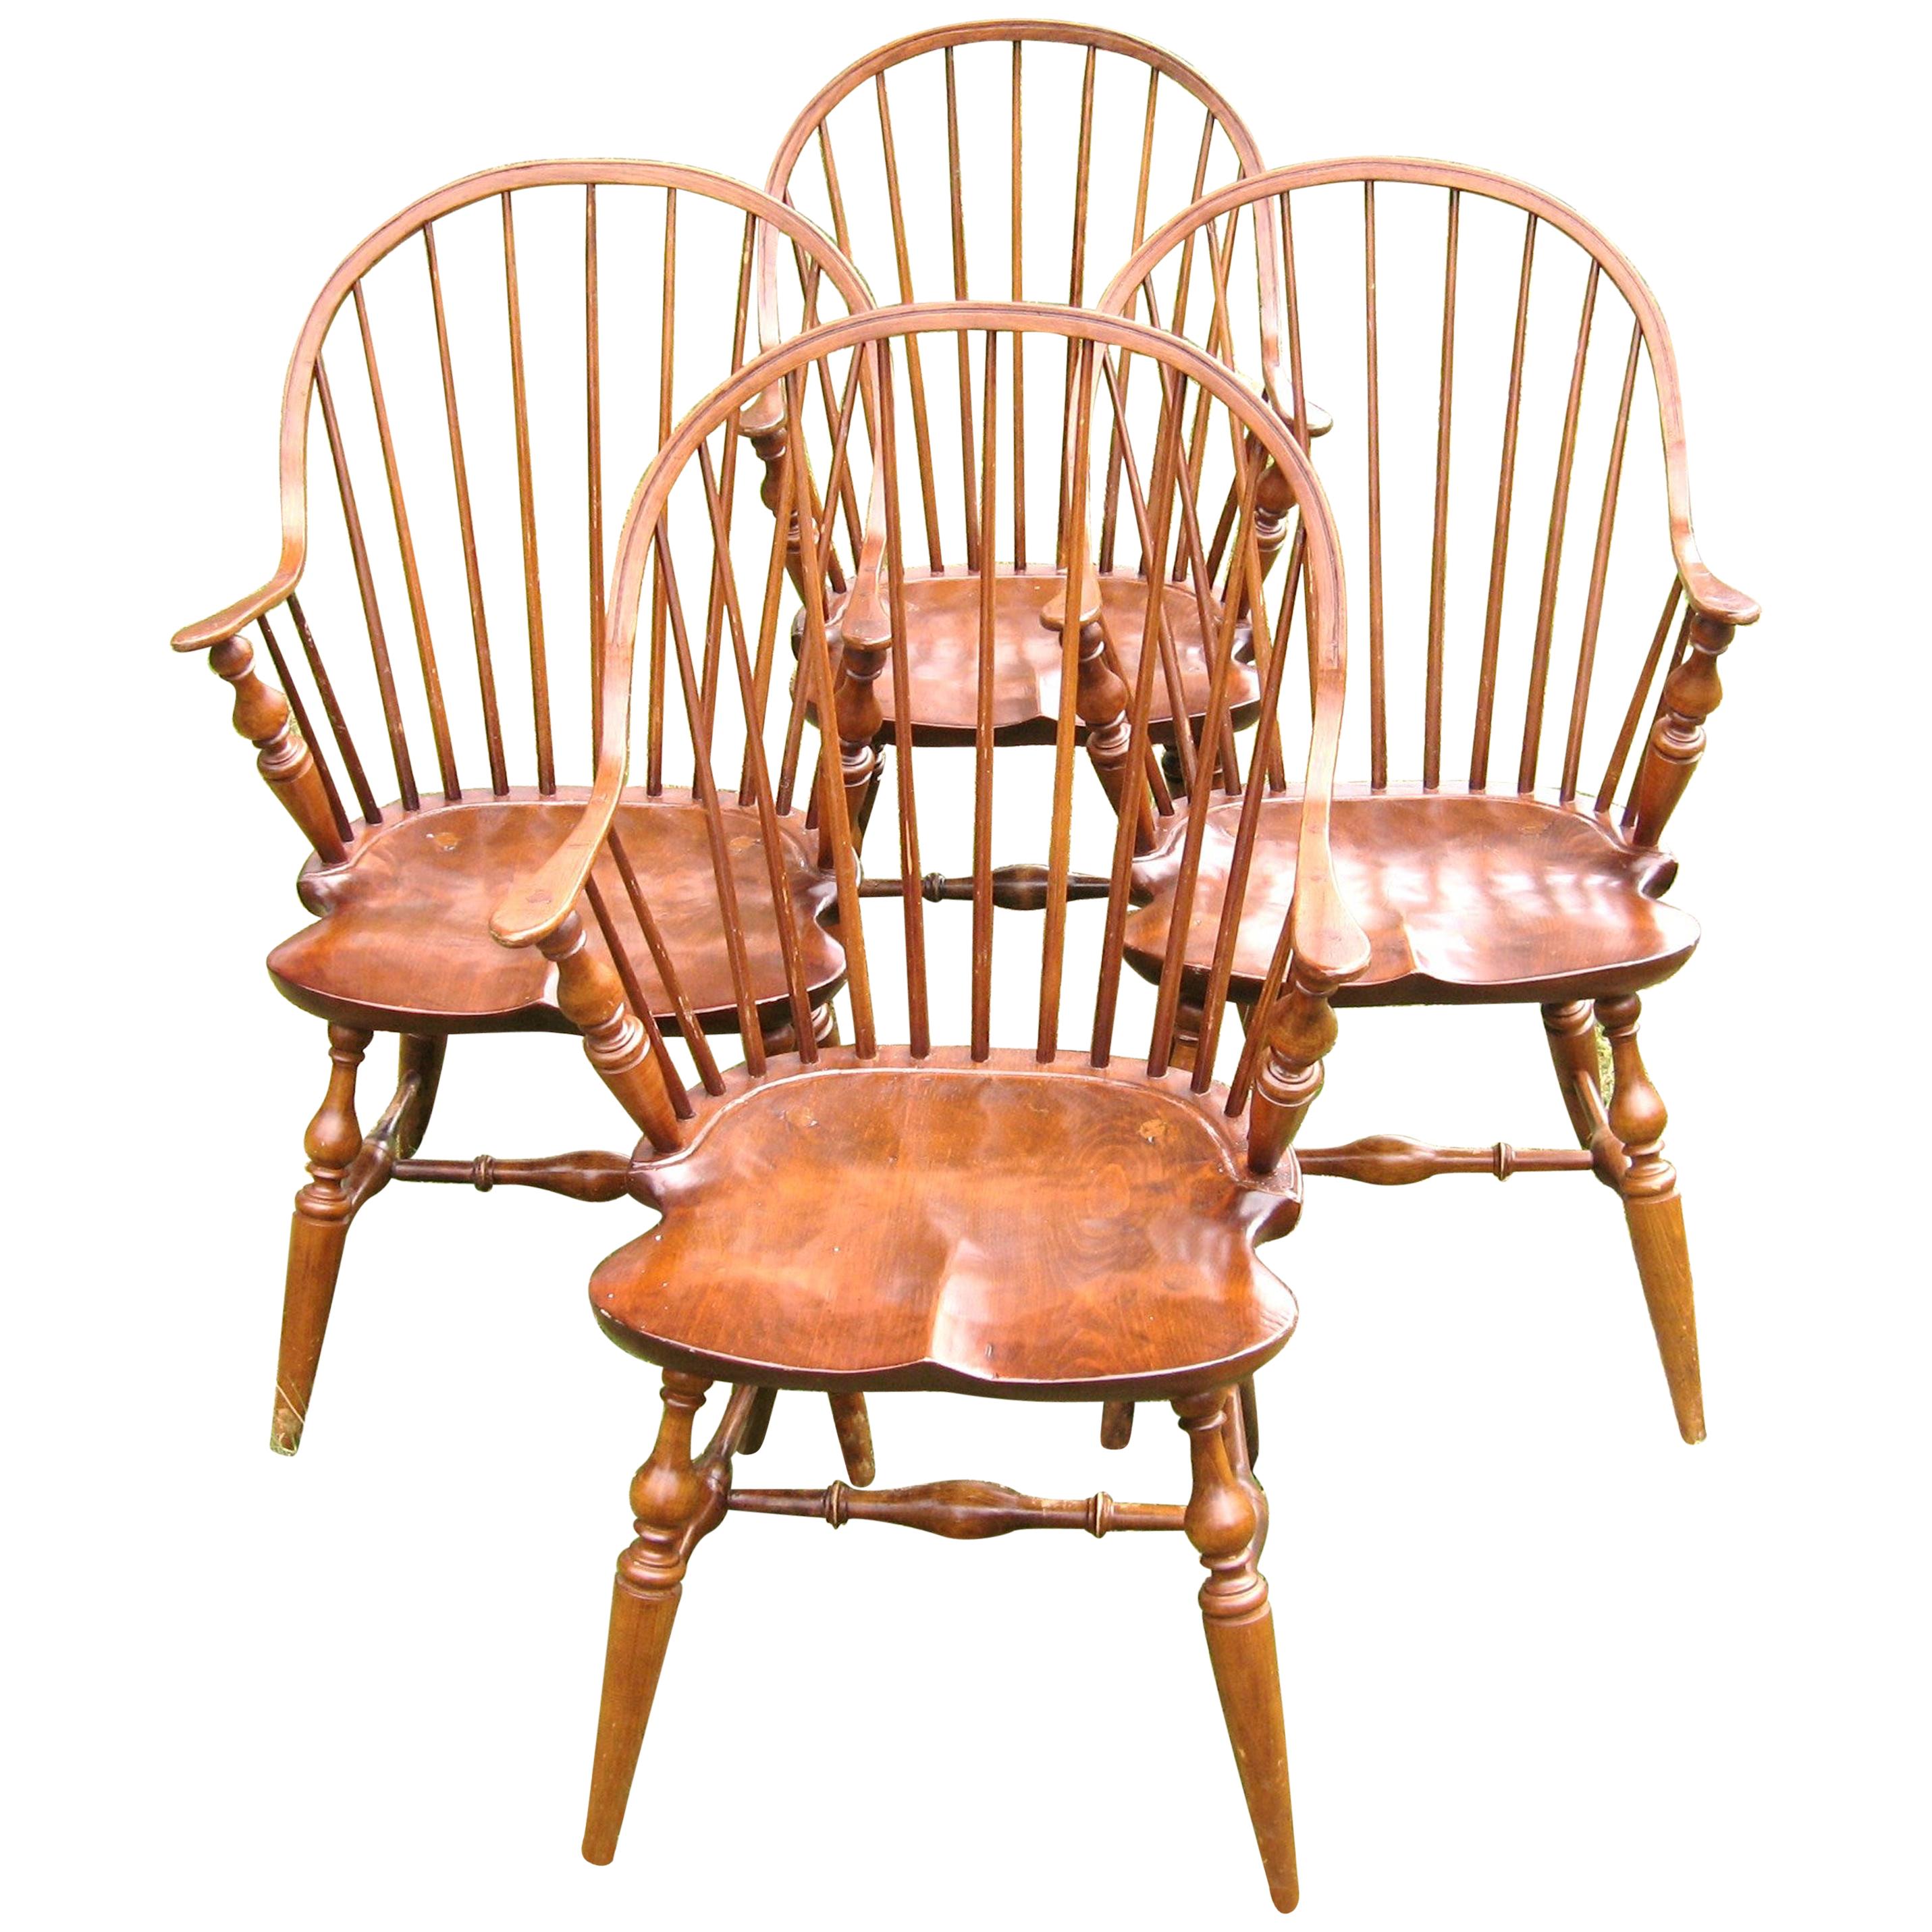 New York Style Windsor Chair Continuous Arm